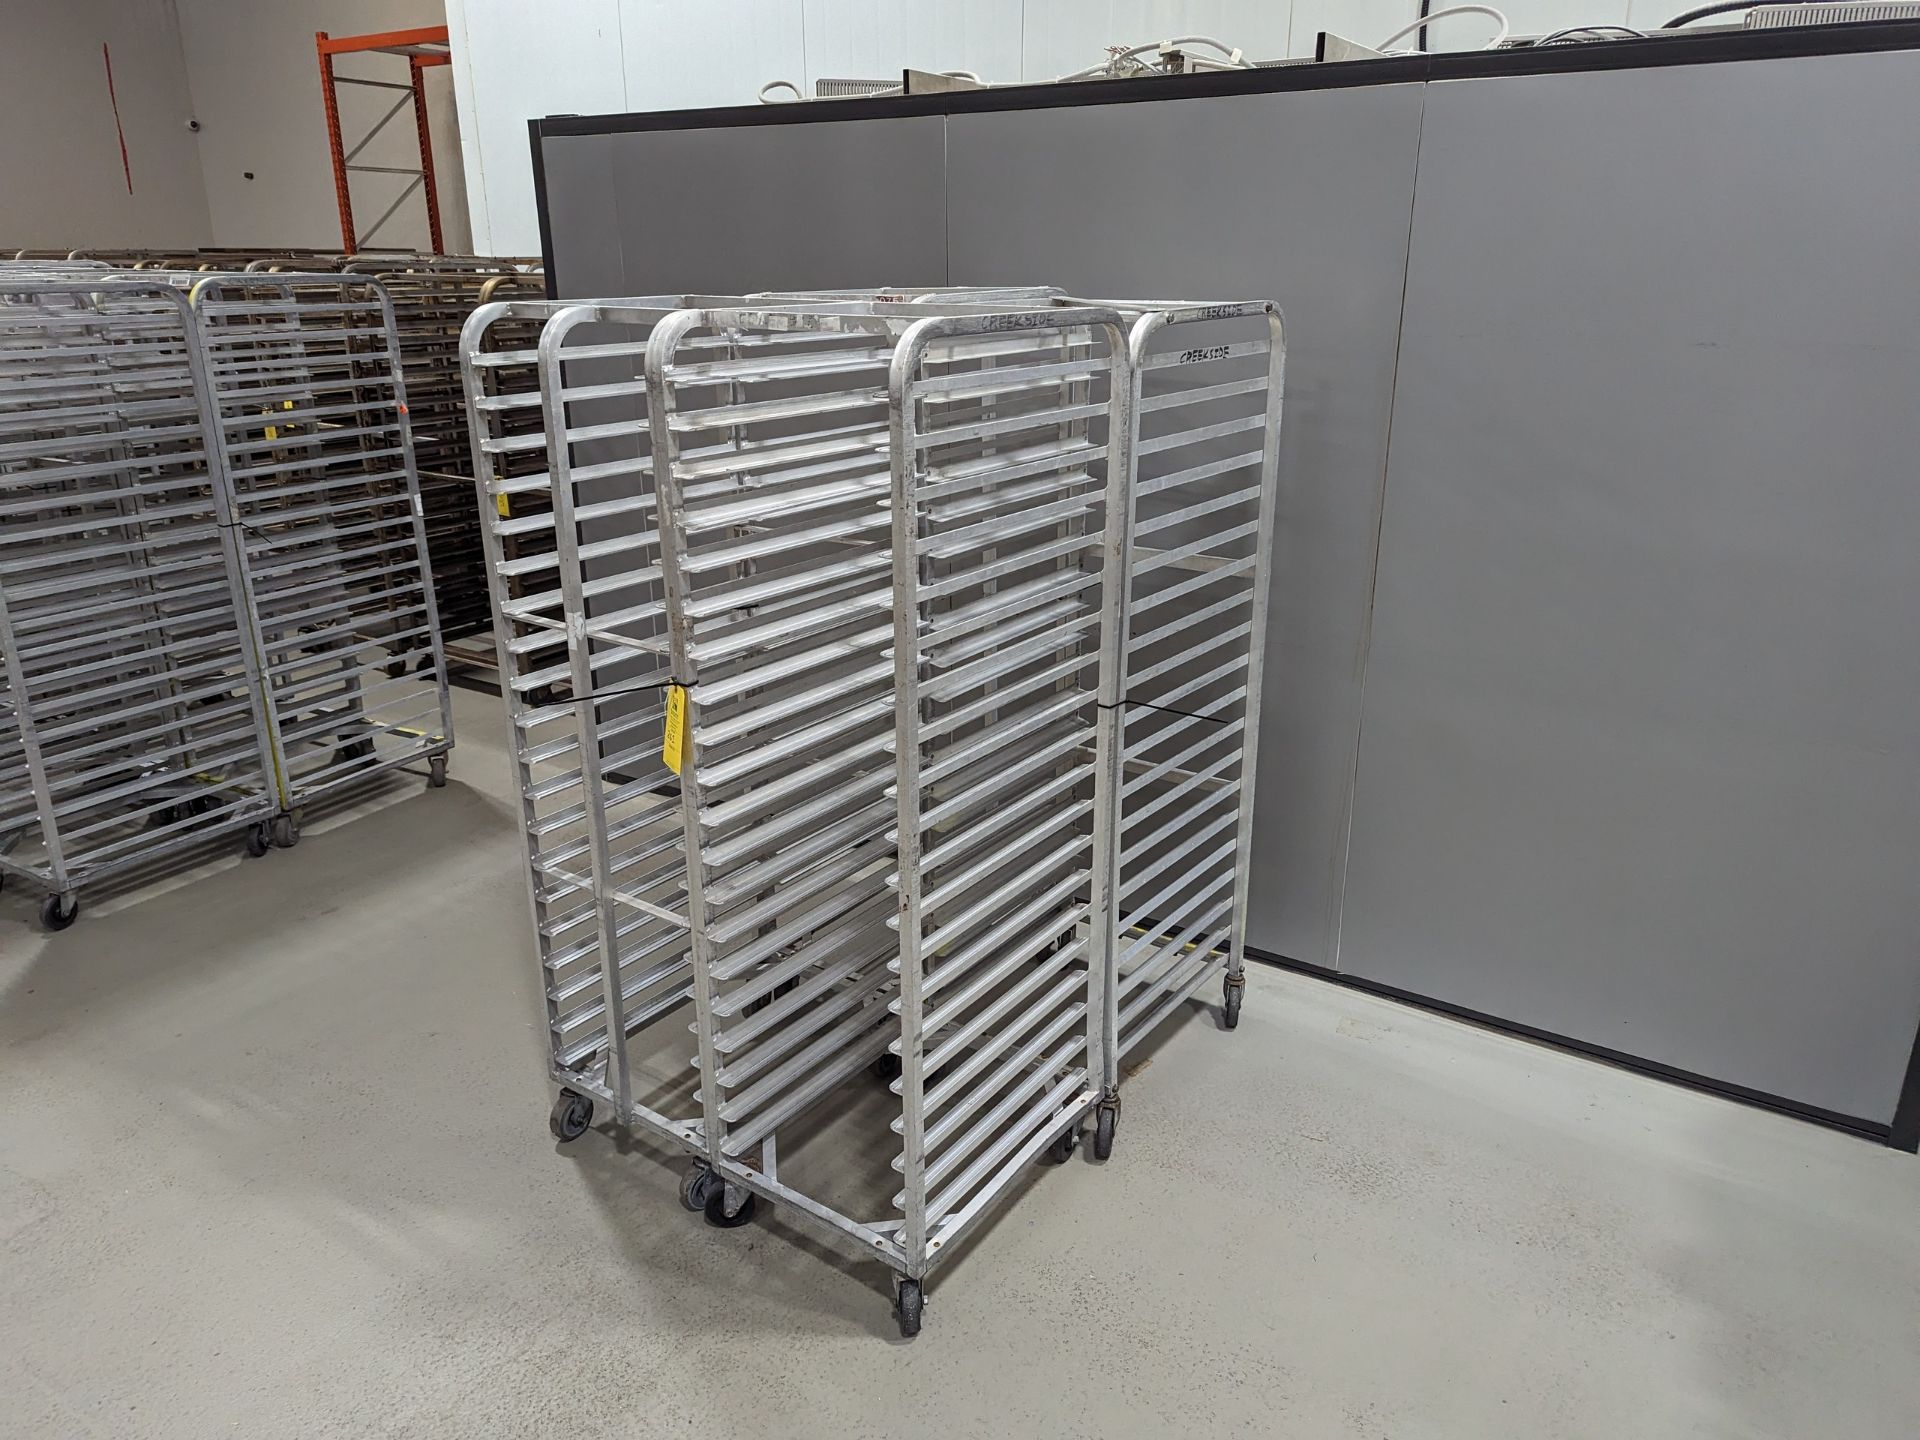 Lot of 4 Single Wide Aluminum Bakery Racks, Dimensions LxWxH: 53x41x69 Measurements are for lot of - Image 2 of 7